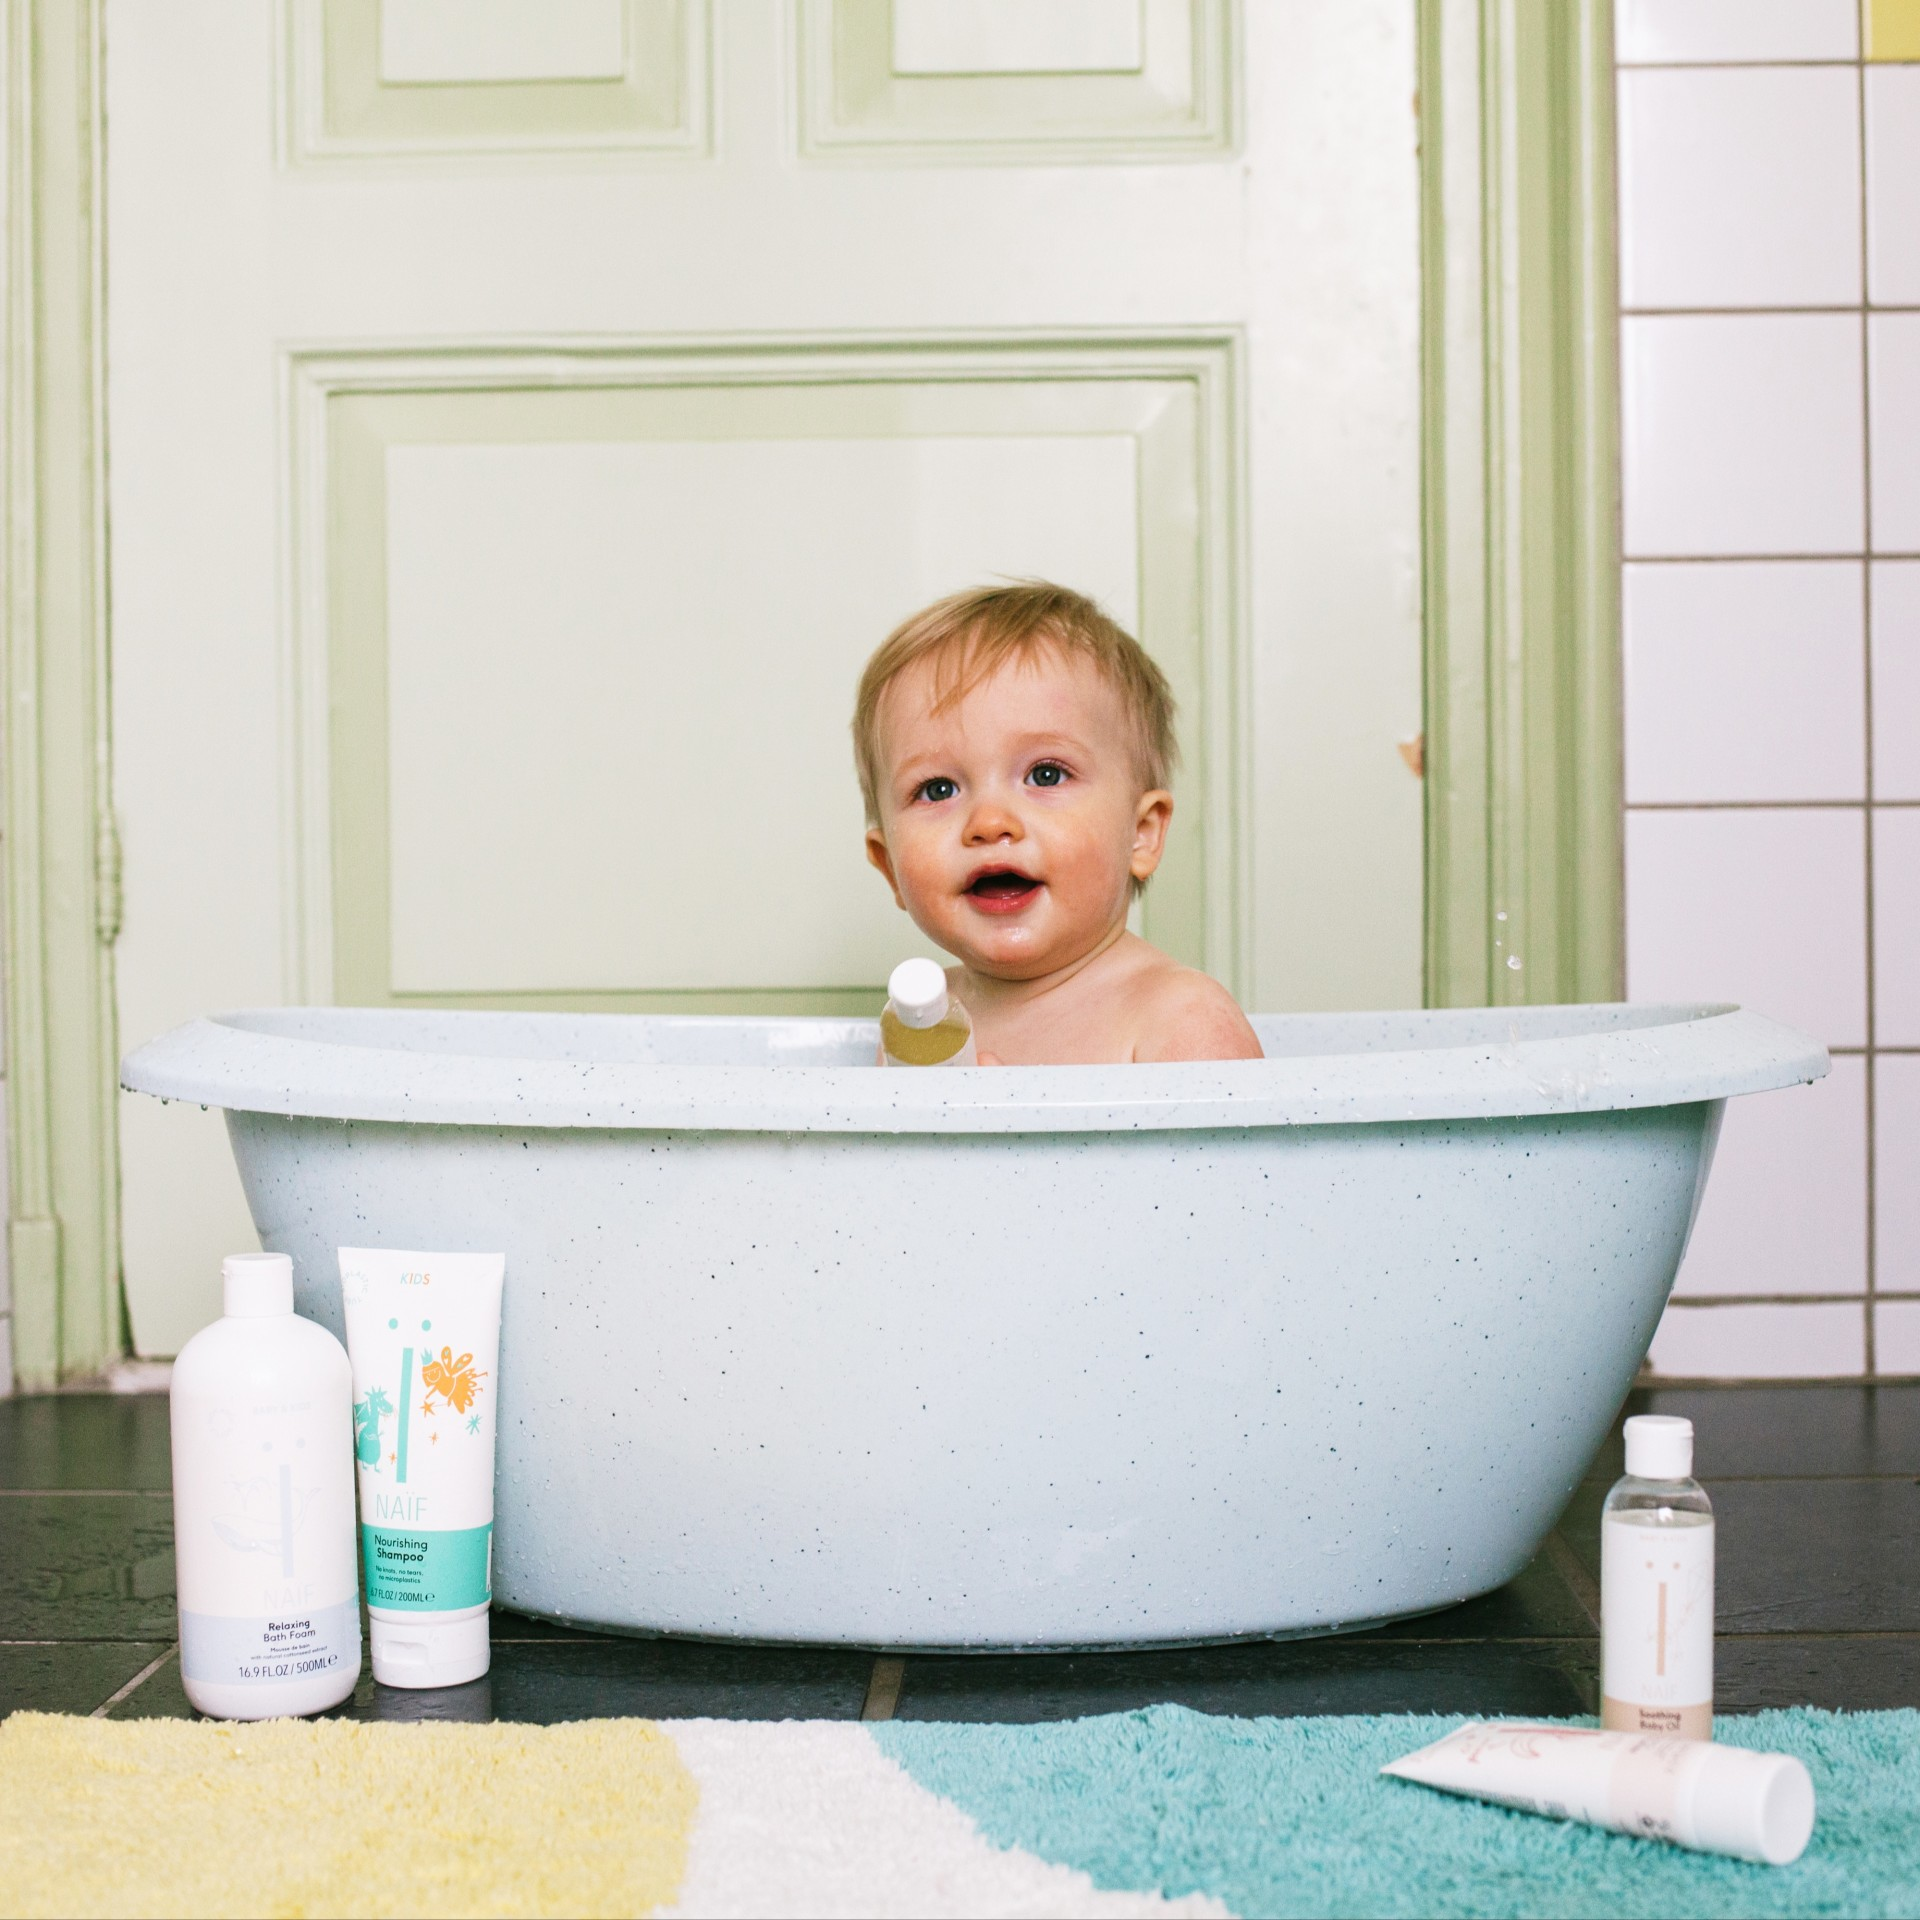 Baby care, what do you use when and how?